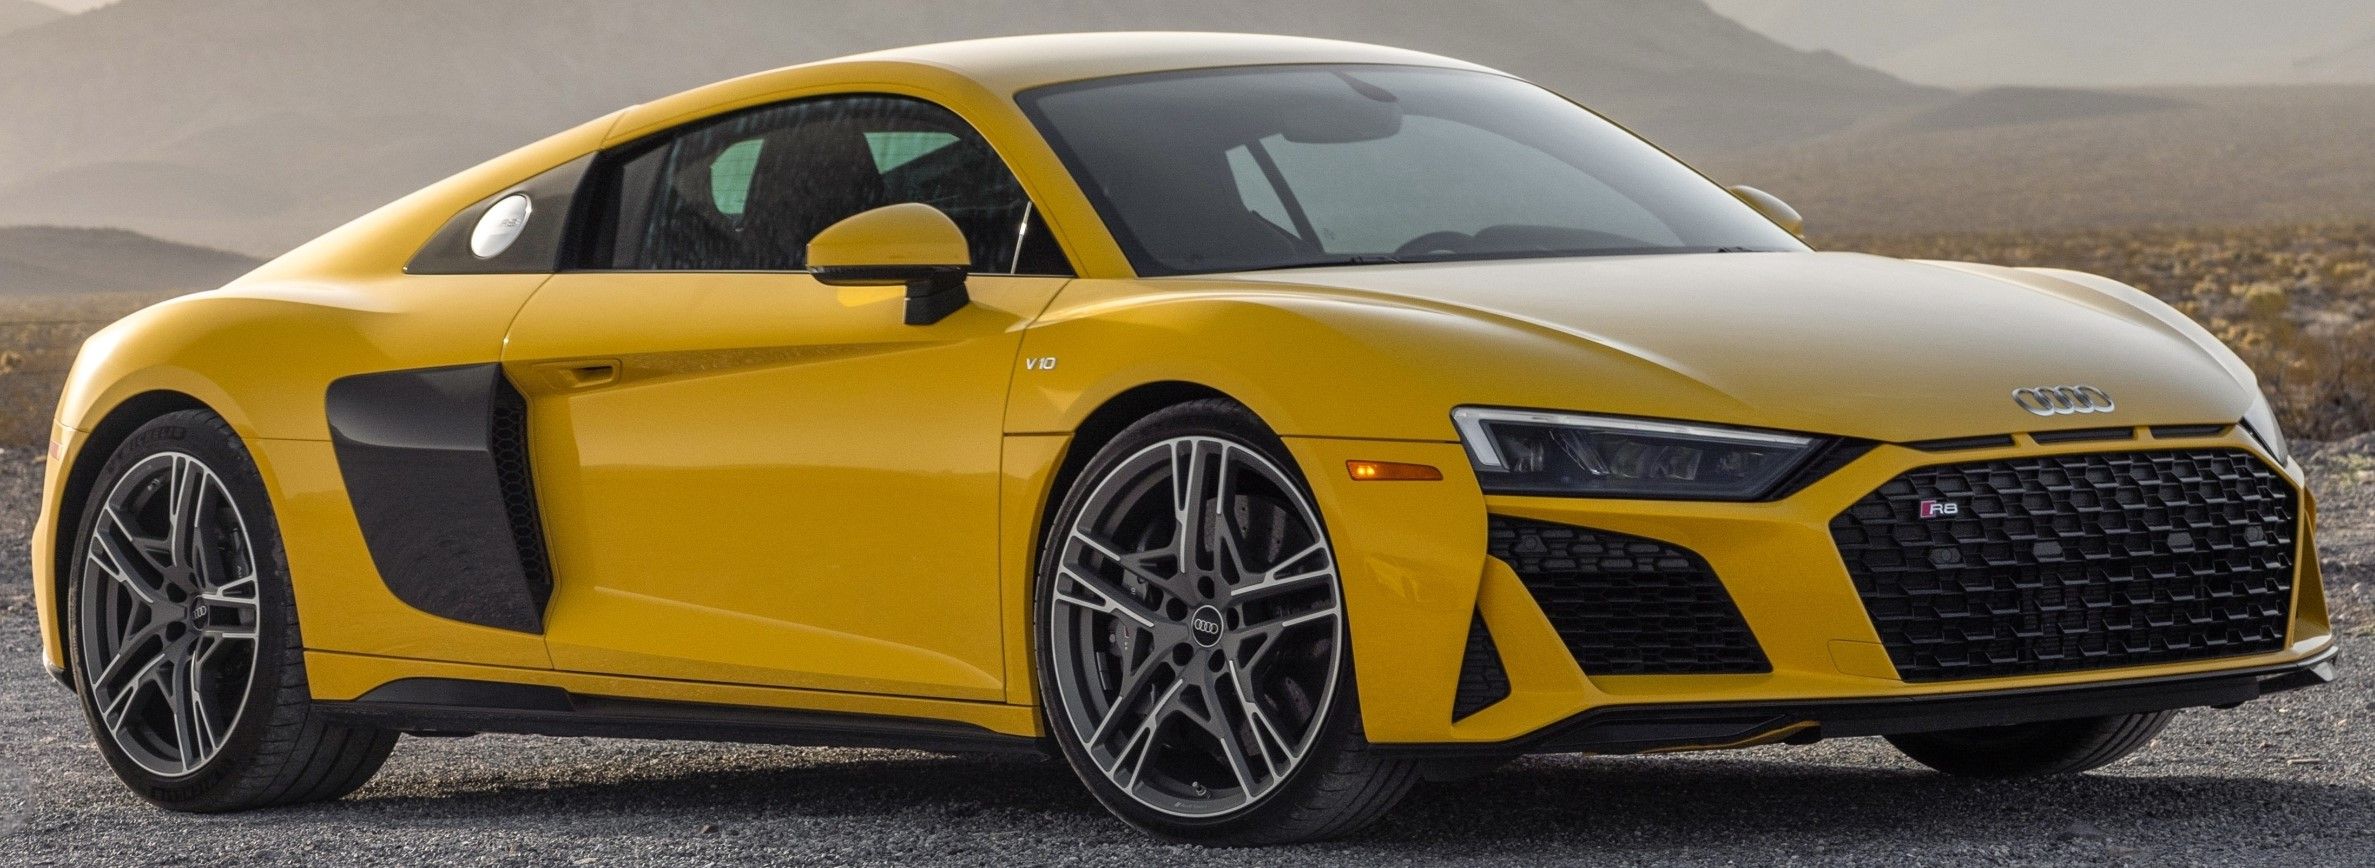 Yellow 2022 Audi R8 Coupe parked outdoors